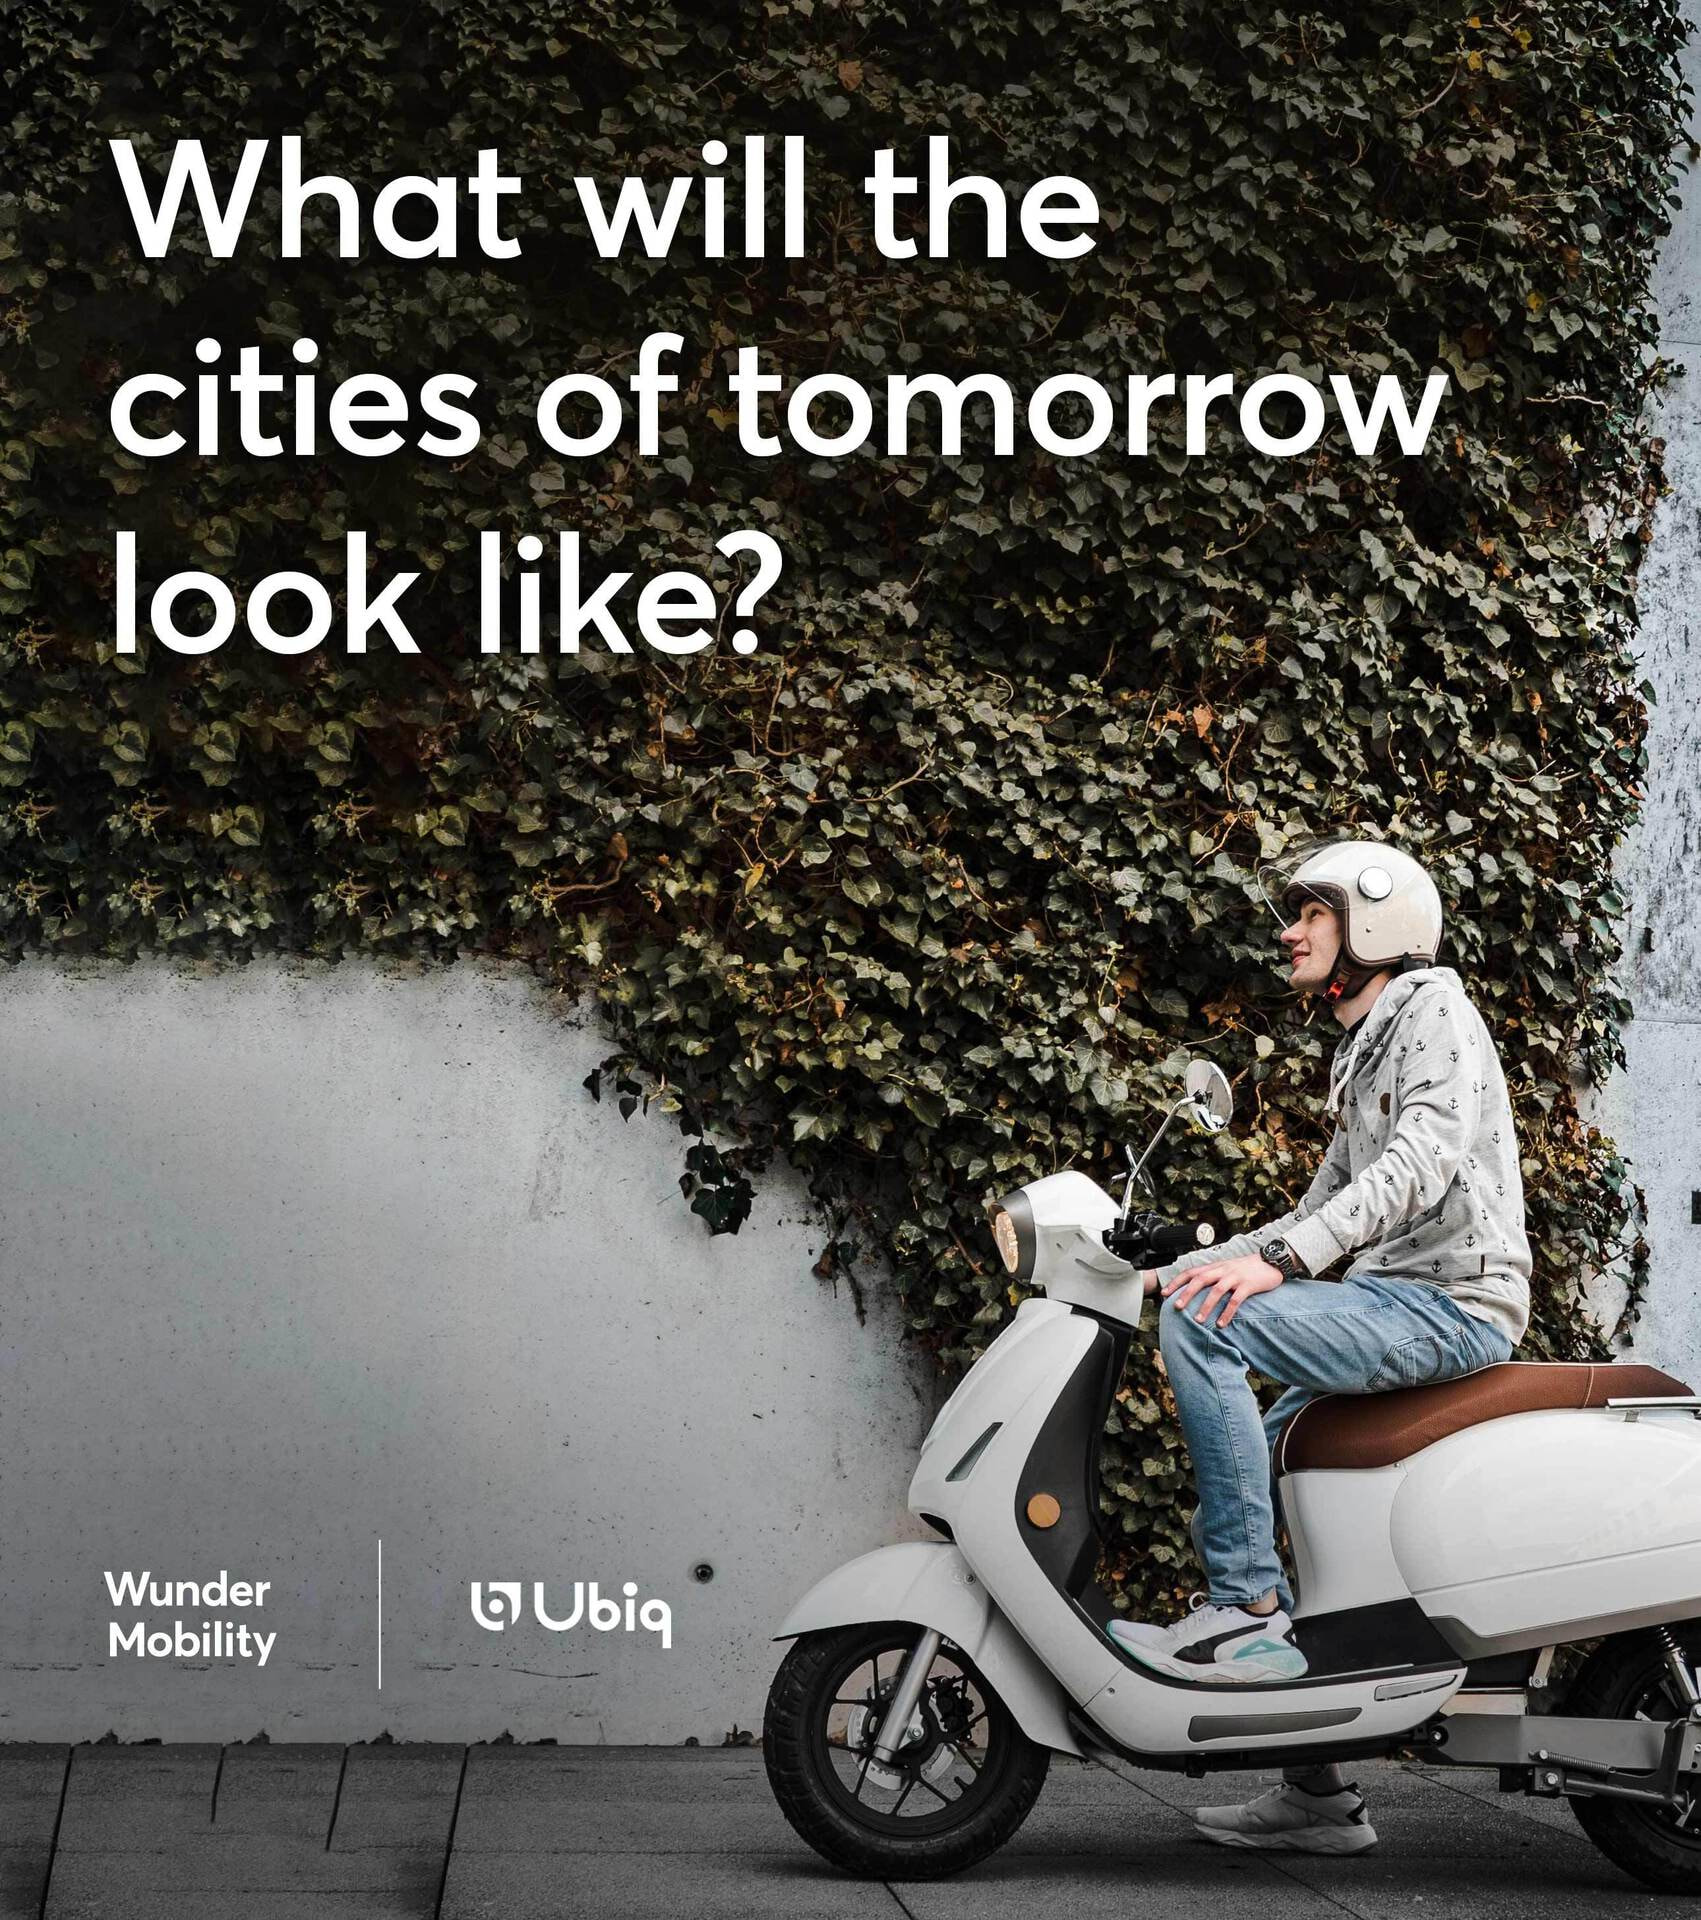 What will the cities of tomorrow look like?